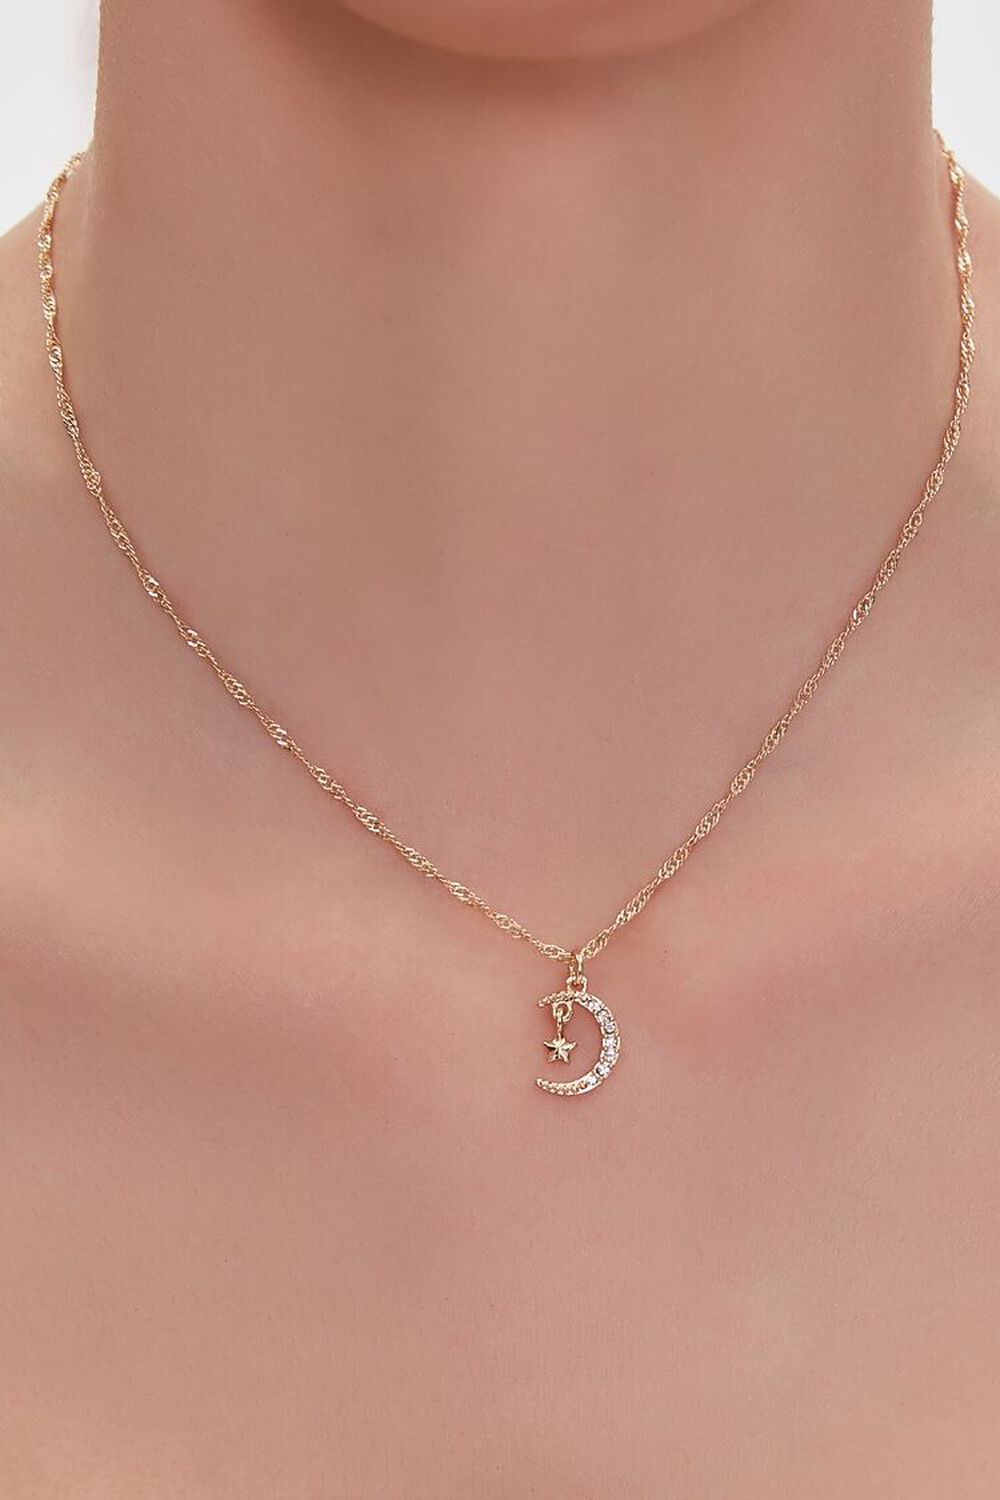 GOLD/CLEAR Rhinestone Crescent Moon Pendant Necklace, image 1